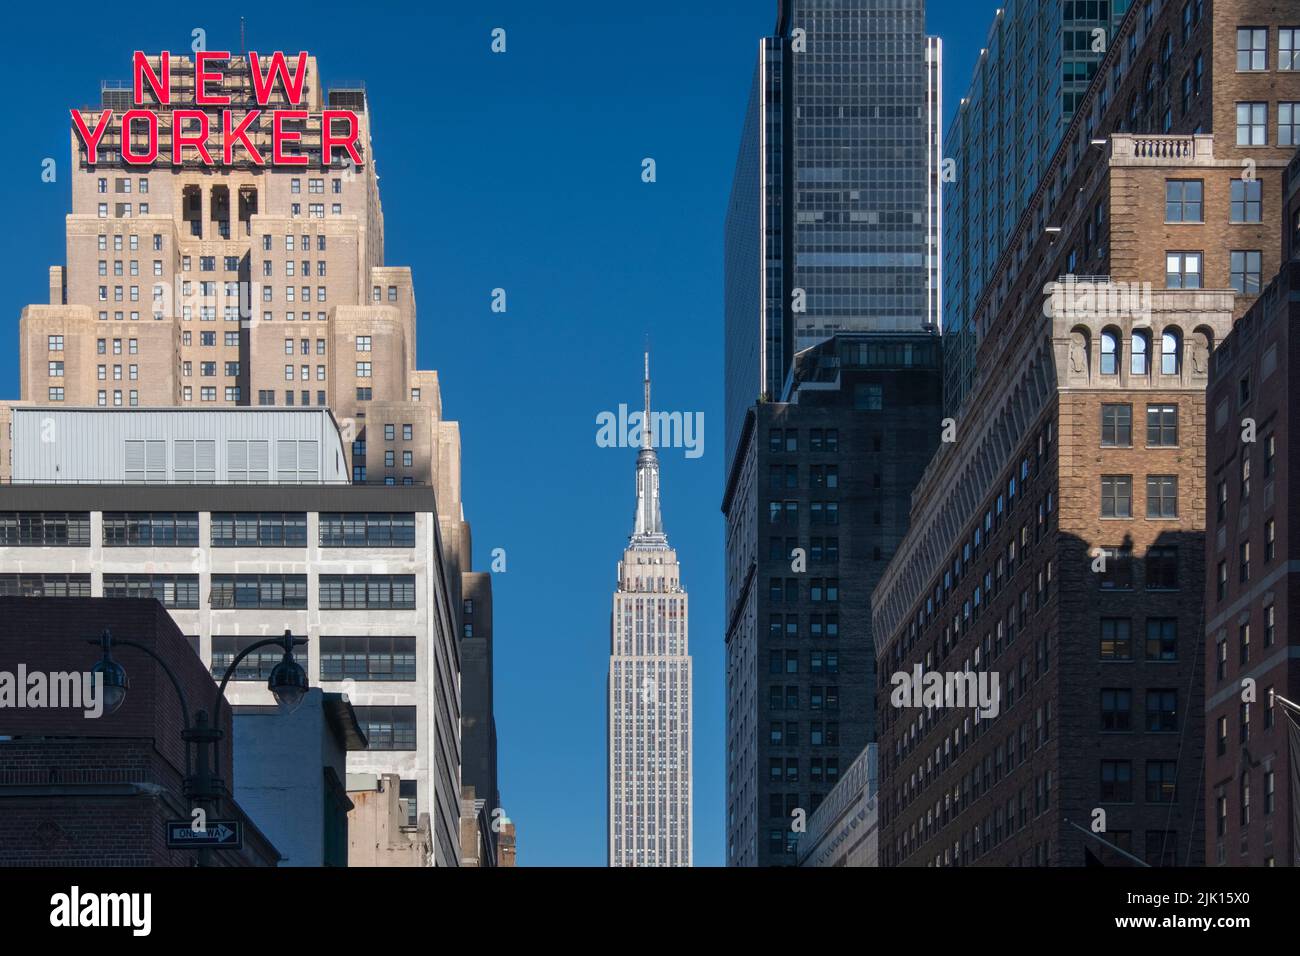 The New Yorker Hotel and Empire State Building viewed along 34th Street, Garment District, Manhattan, New York, United States of America Stock Photo